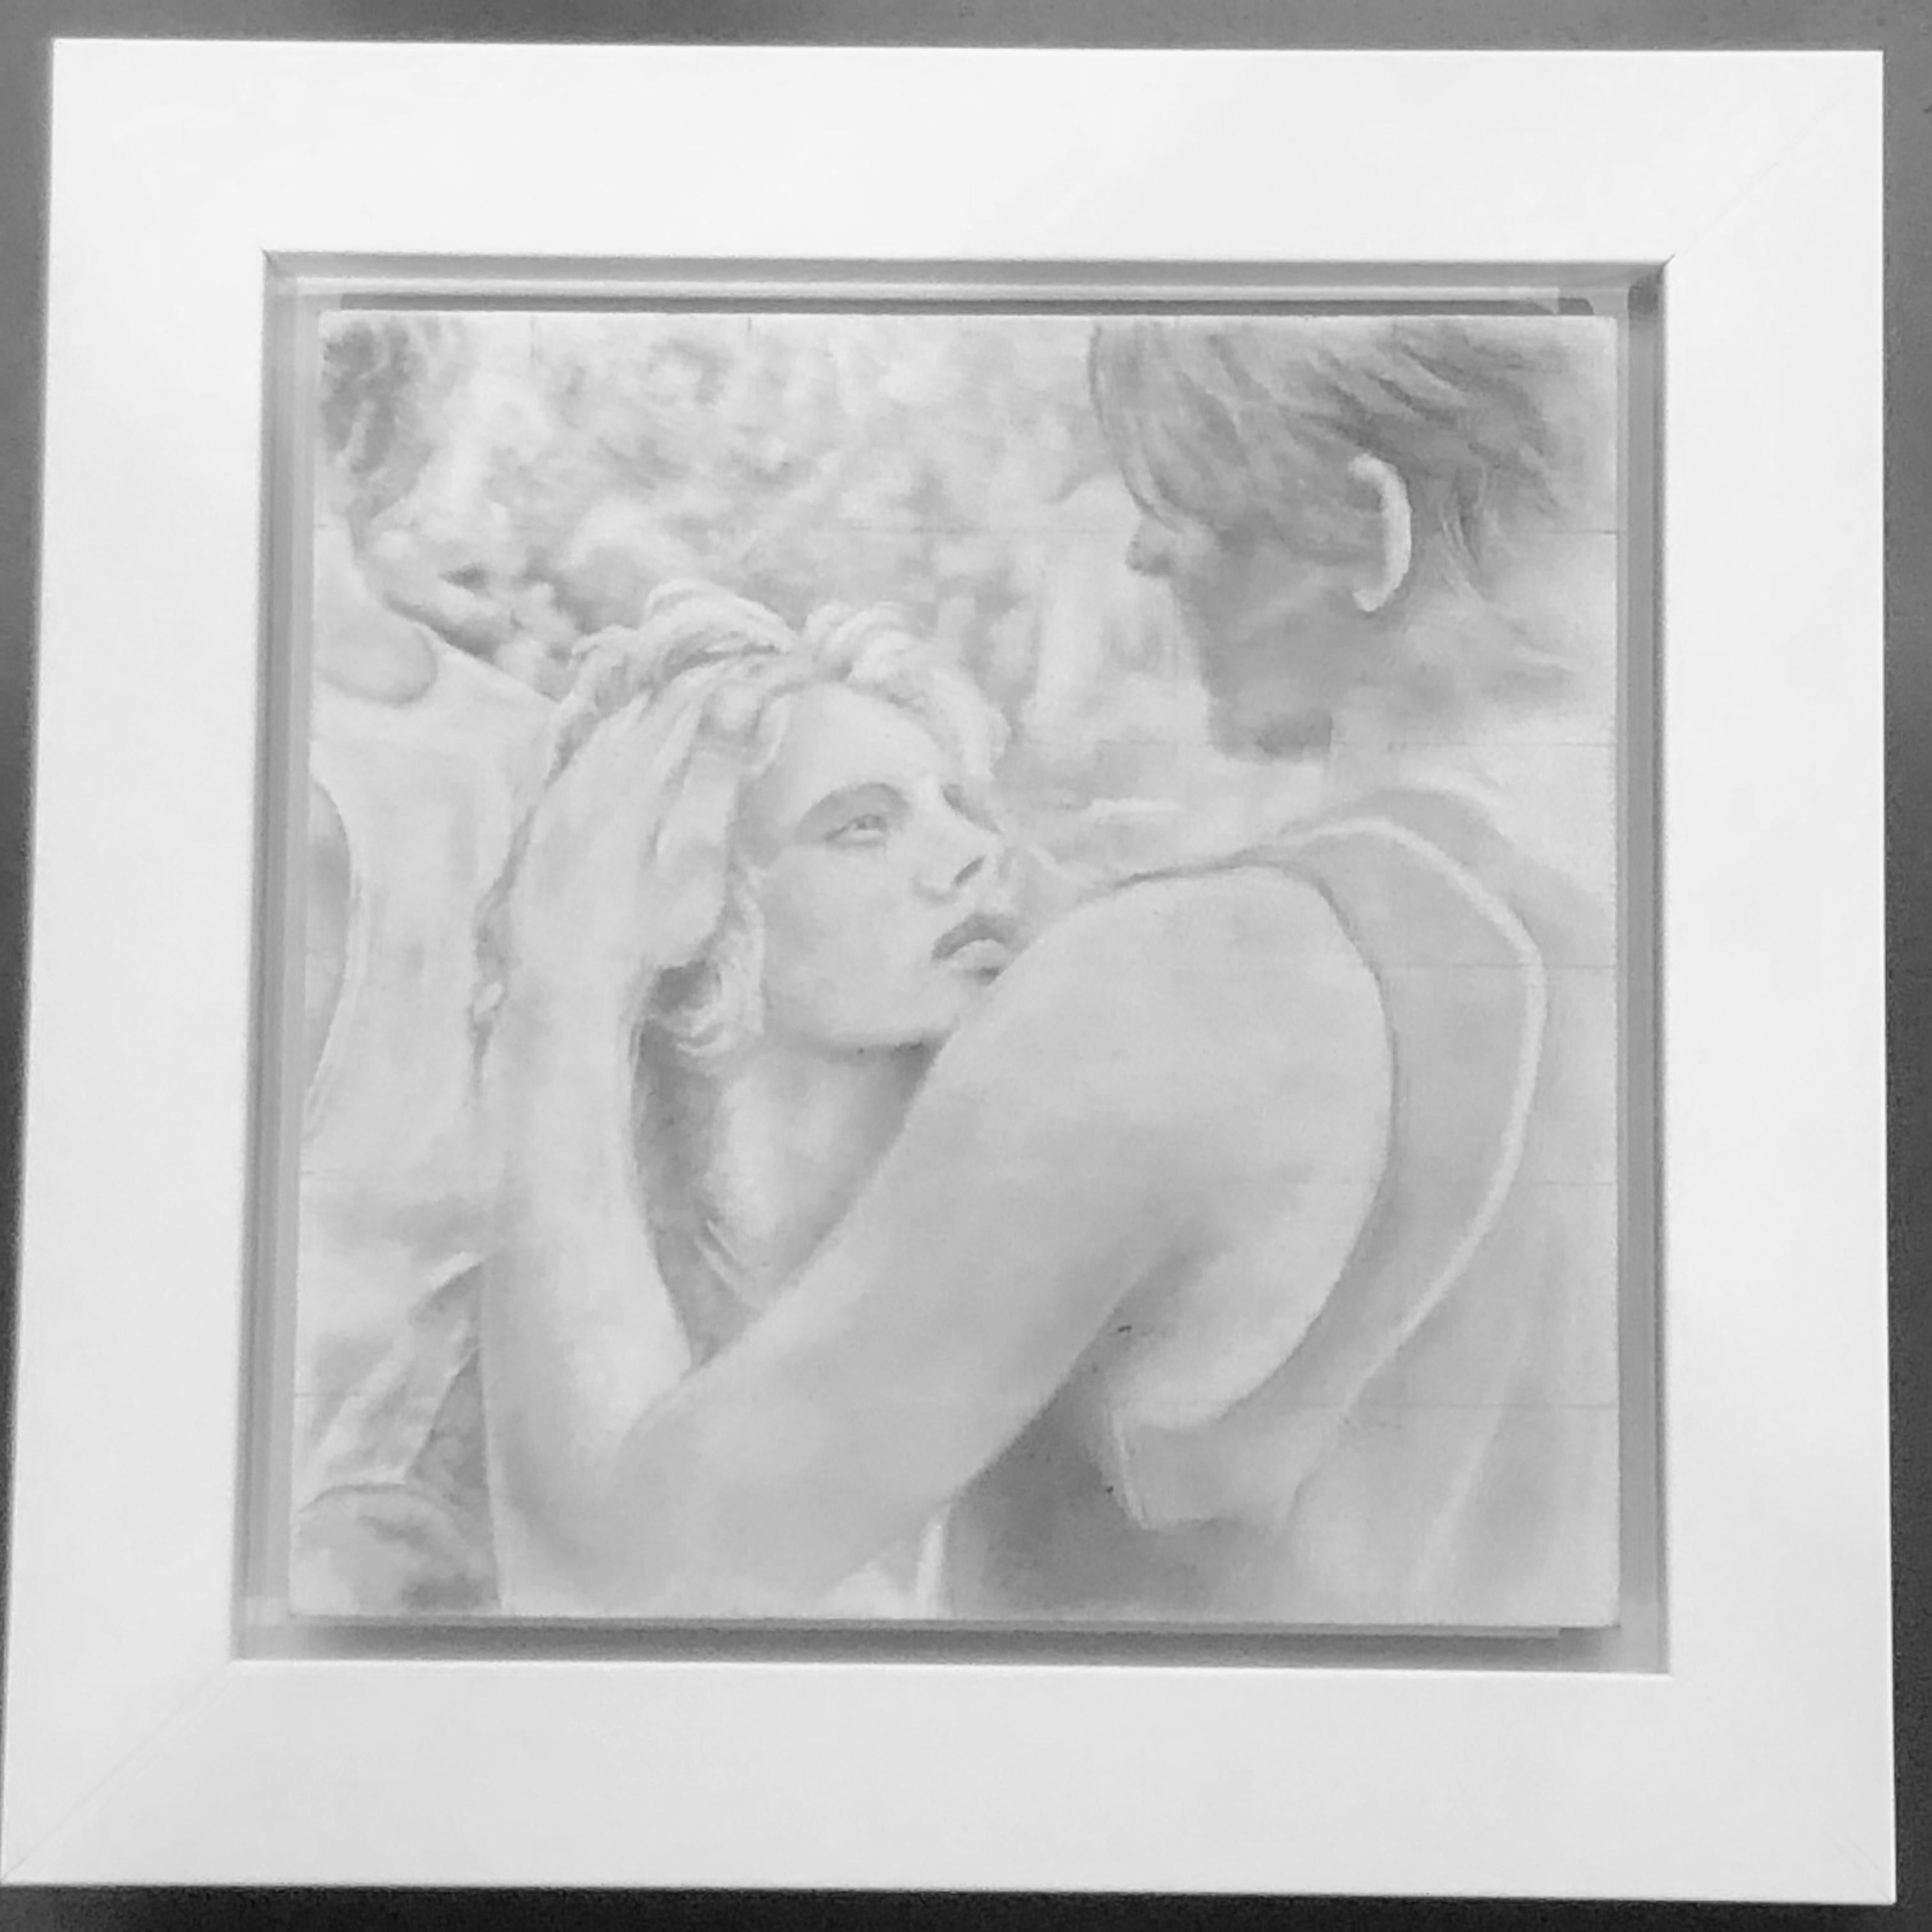 Untitled #6 - Original Graphite Drawing on Panel, Two Figures in Intimate Moment - Art by Rick Sindt